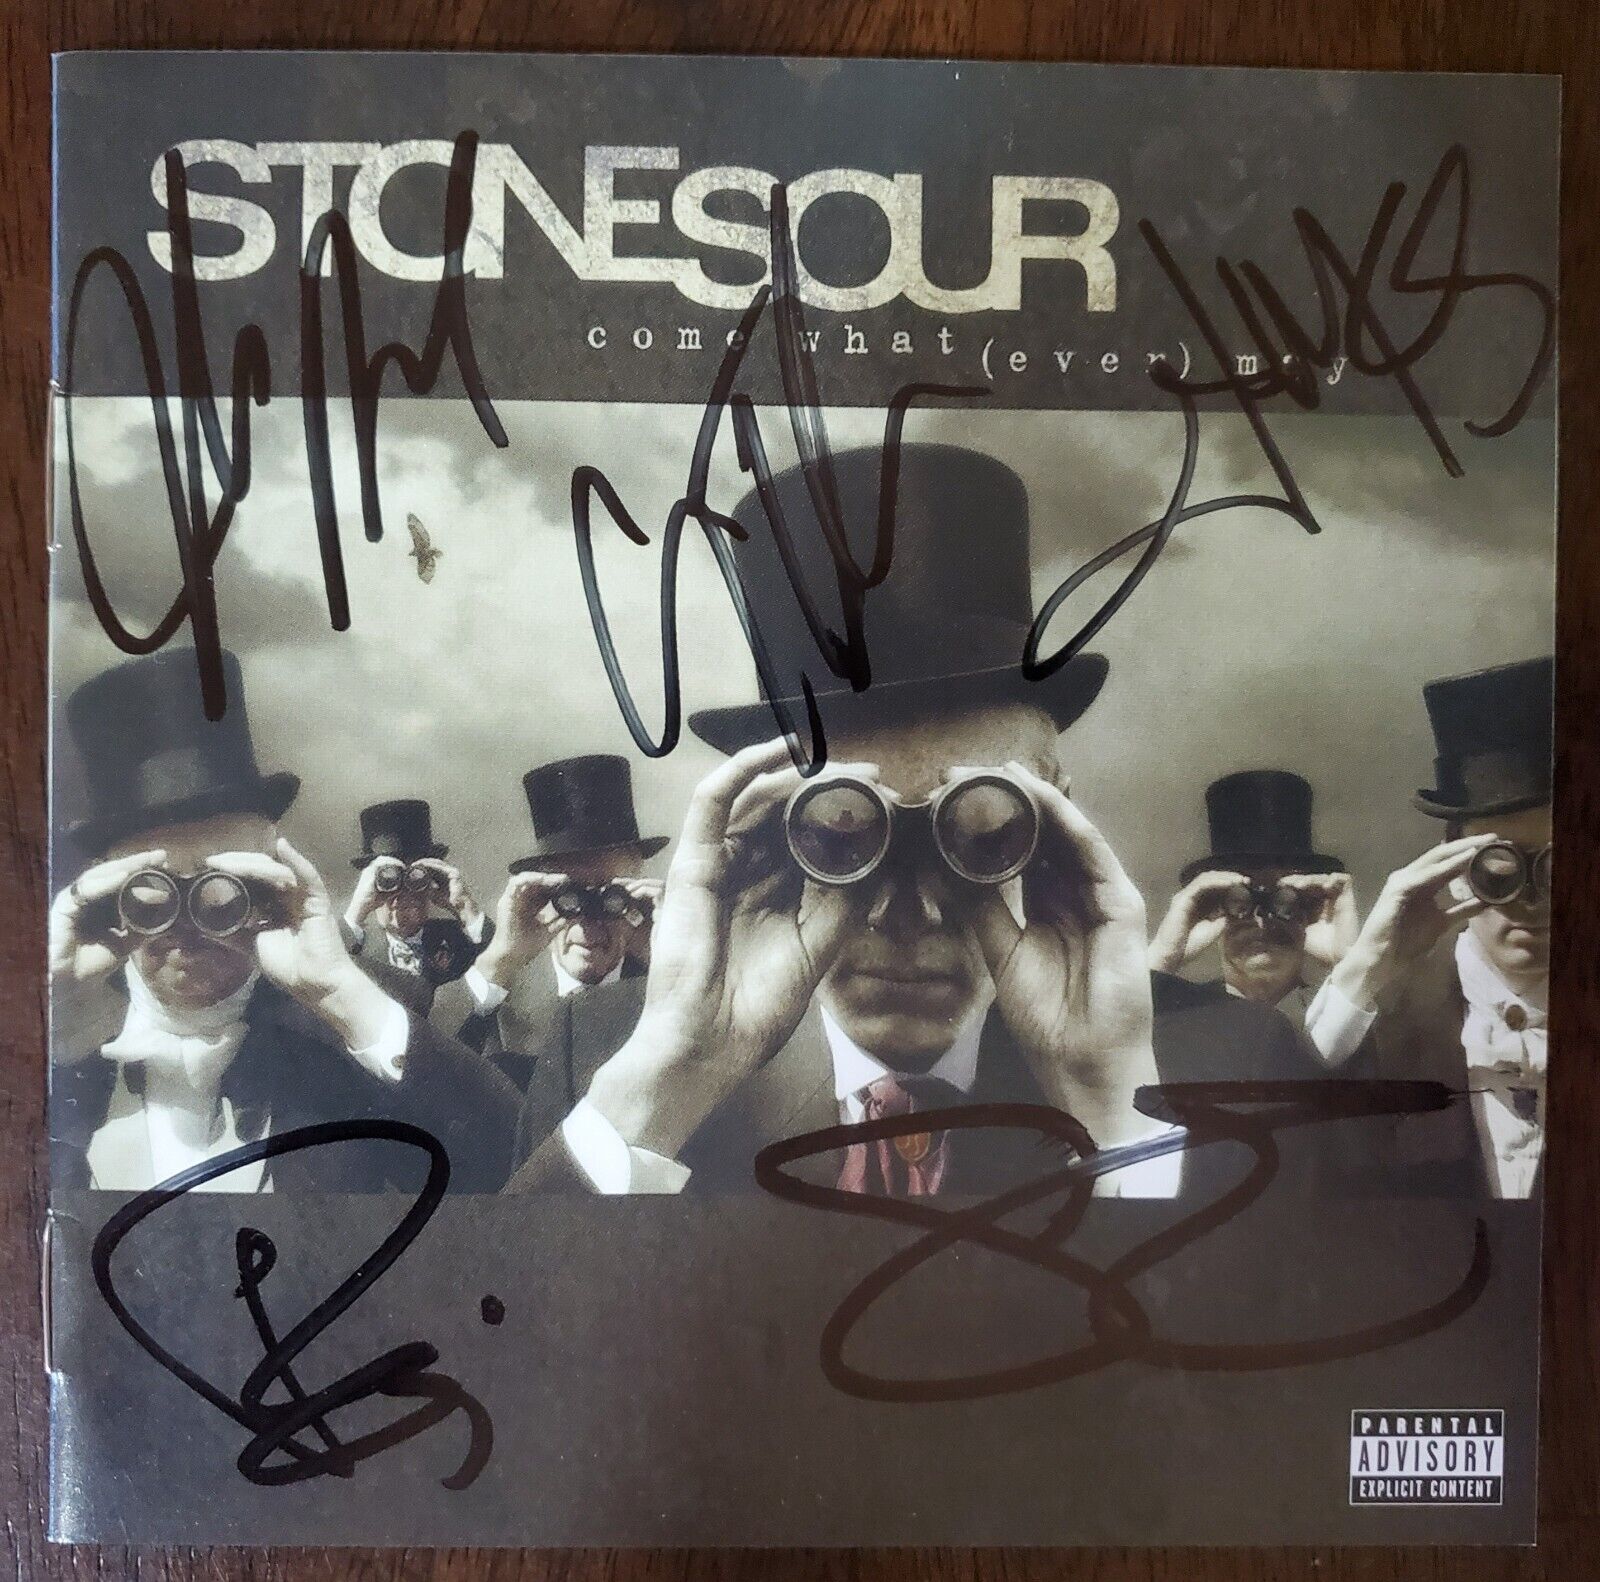 Stone Sour Autographed / Come What(ever) May (2006) CD Corey Taylor, Jim Root